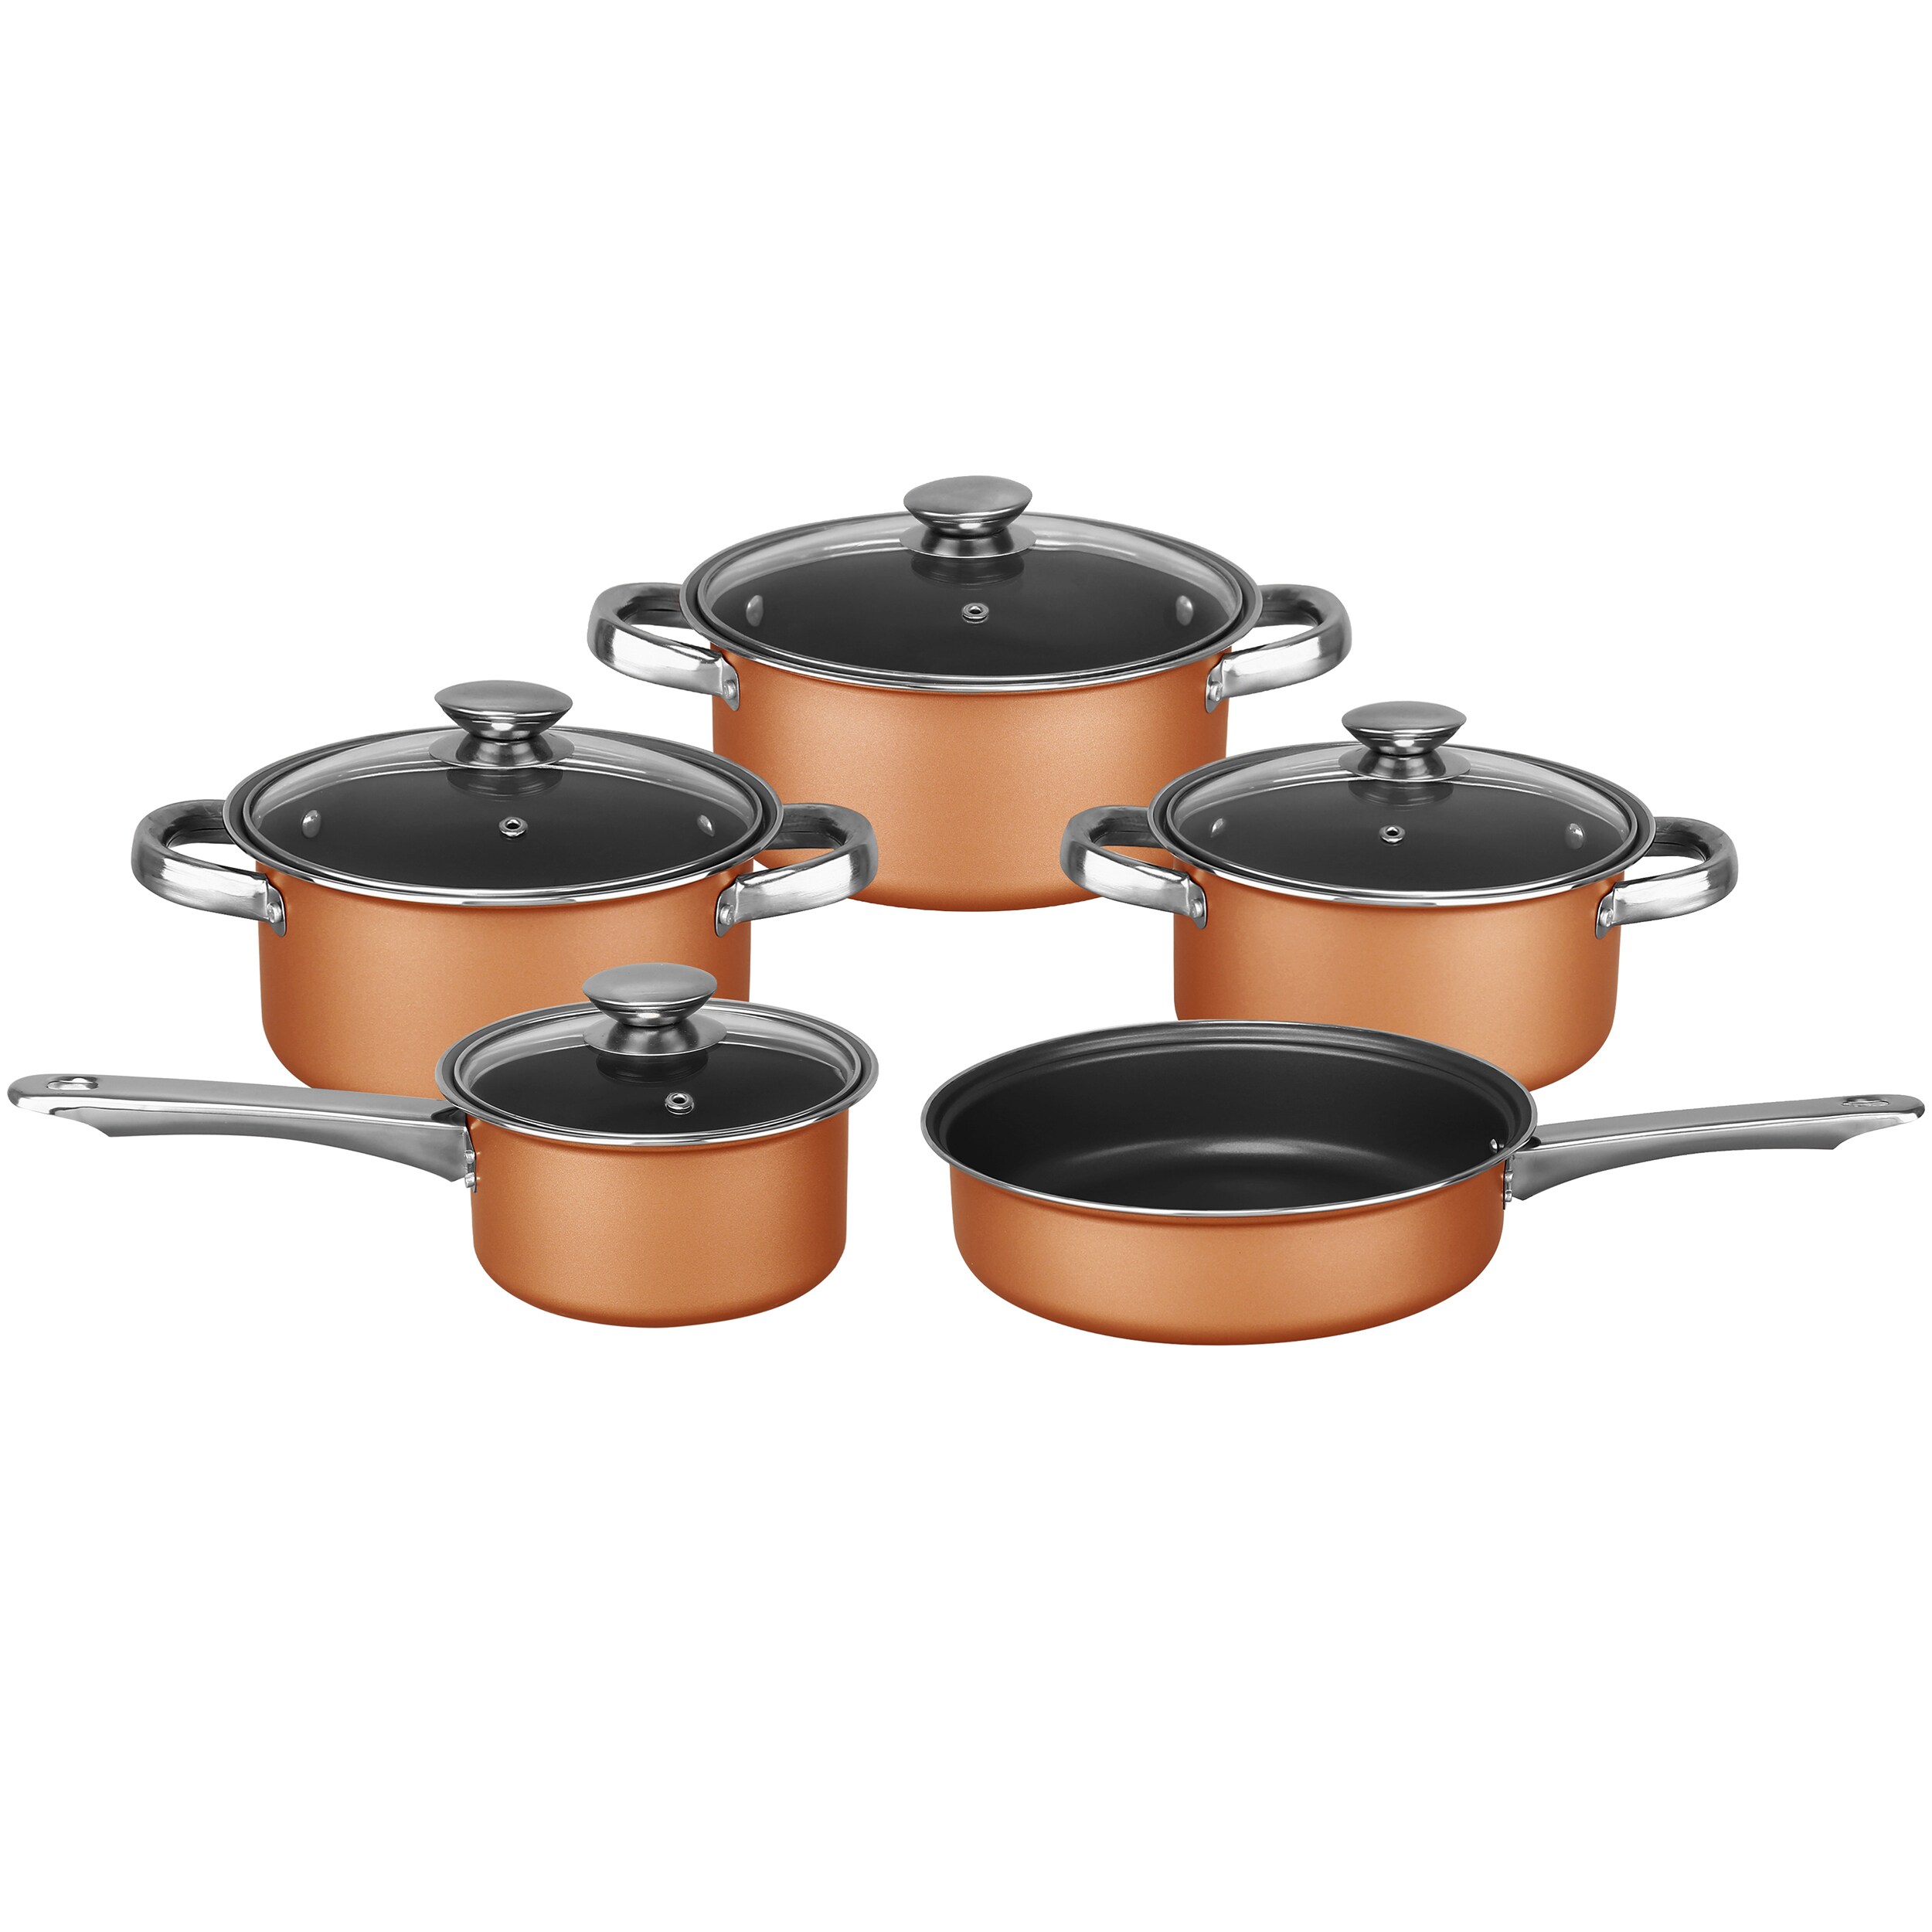 Brentwood 10 Nonstick Induction Copper Frying Pan